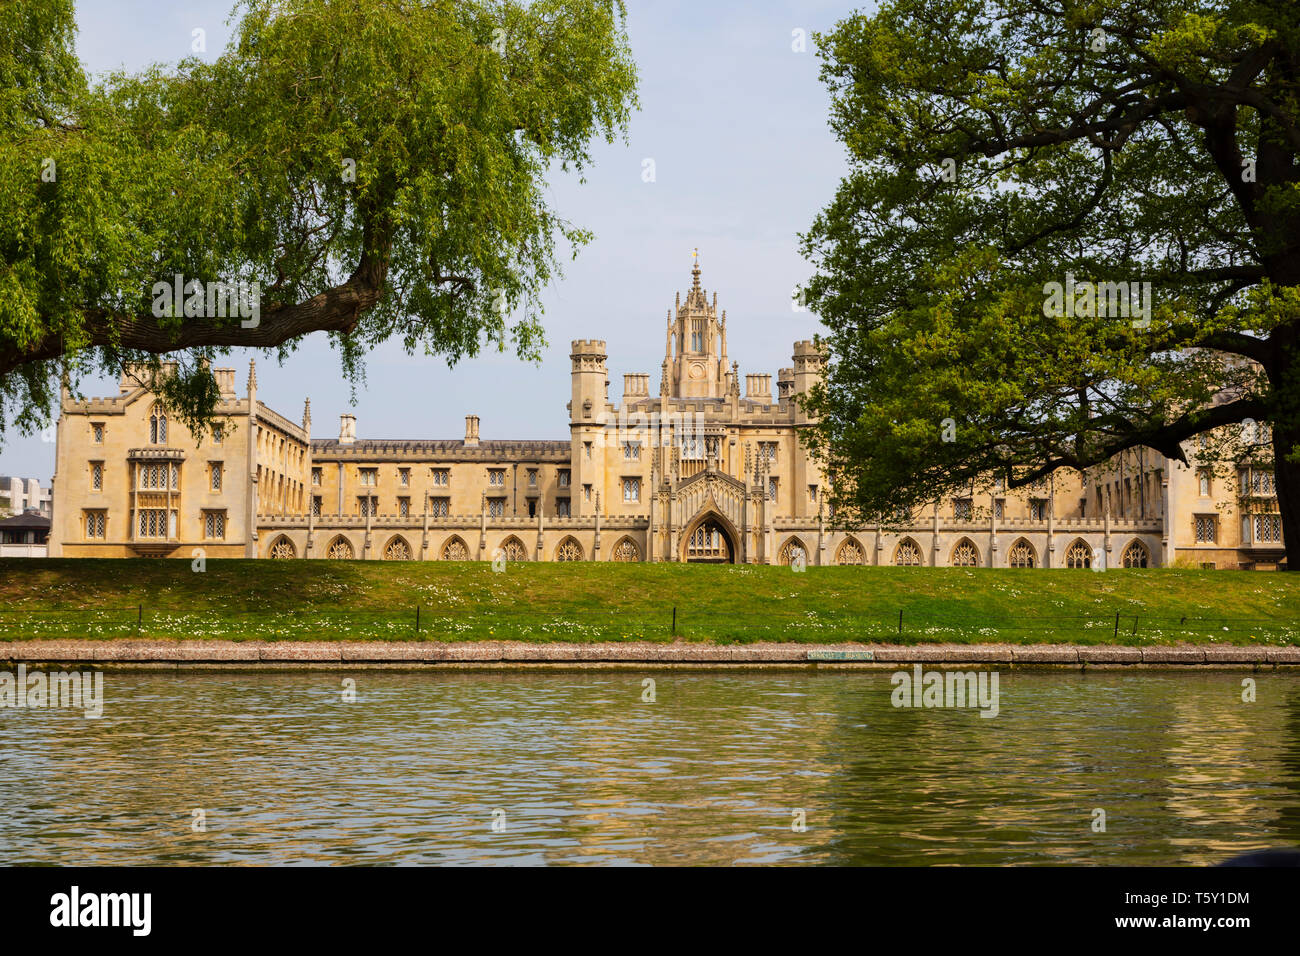 St Johns College seen from the River Cam, University town of Cambridge, Cambridgeshire, England Stock Photo